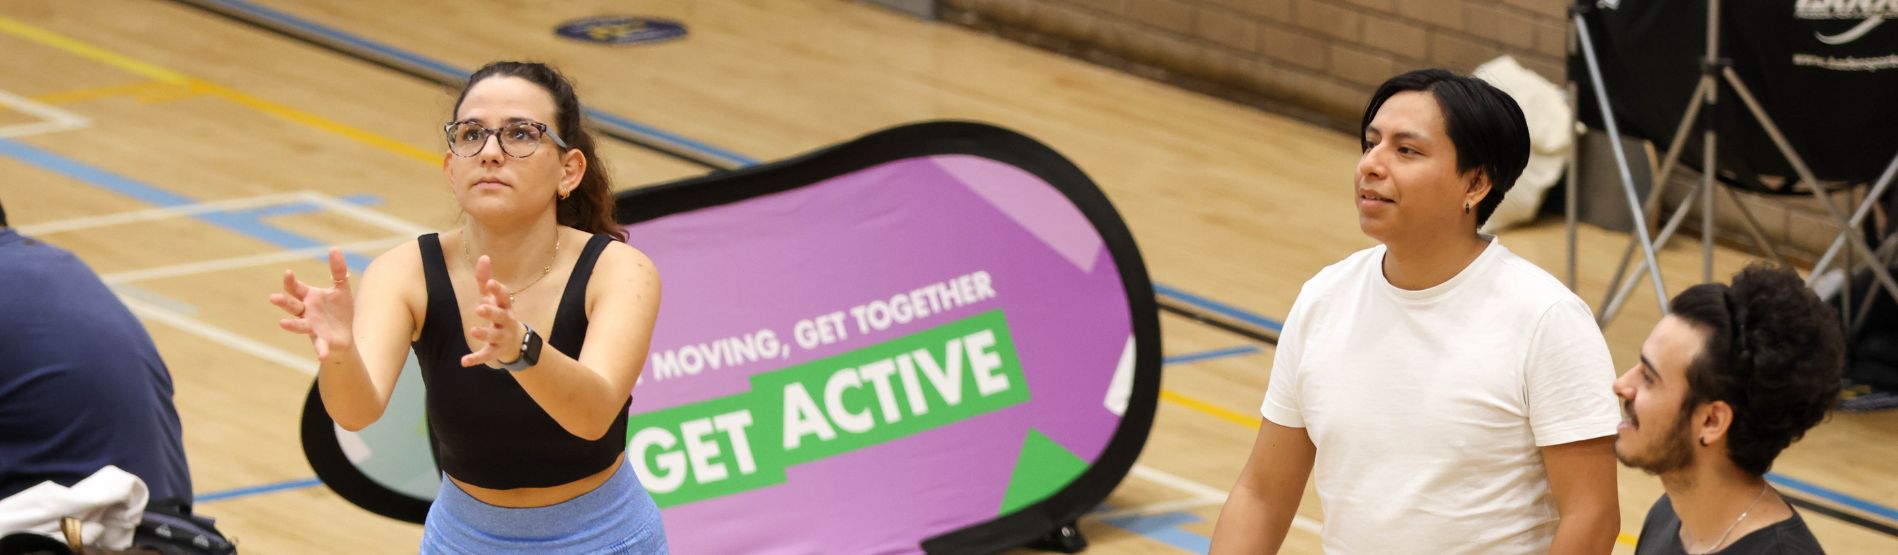 Get Active sessions